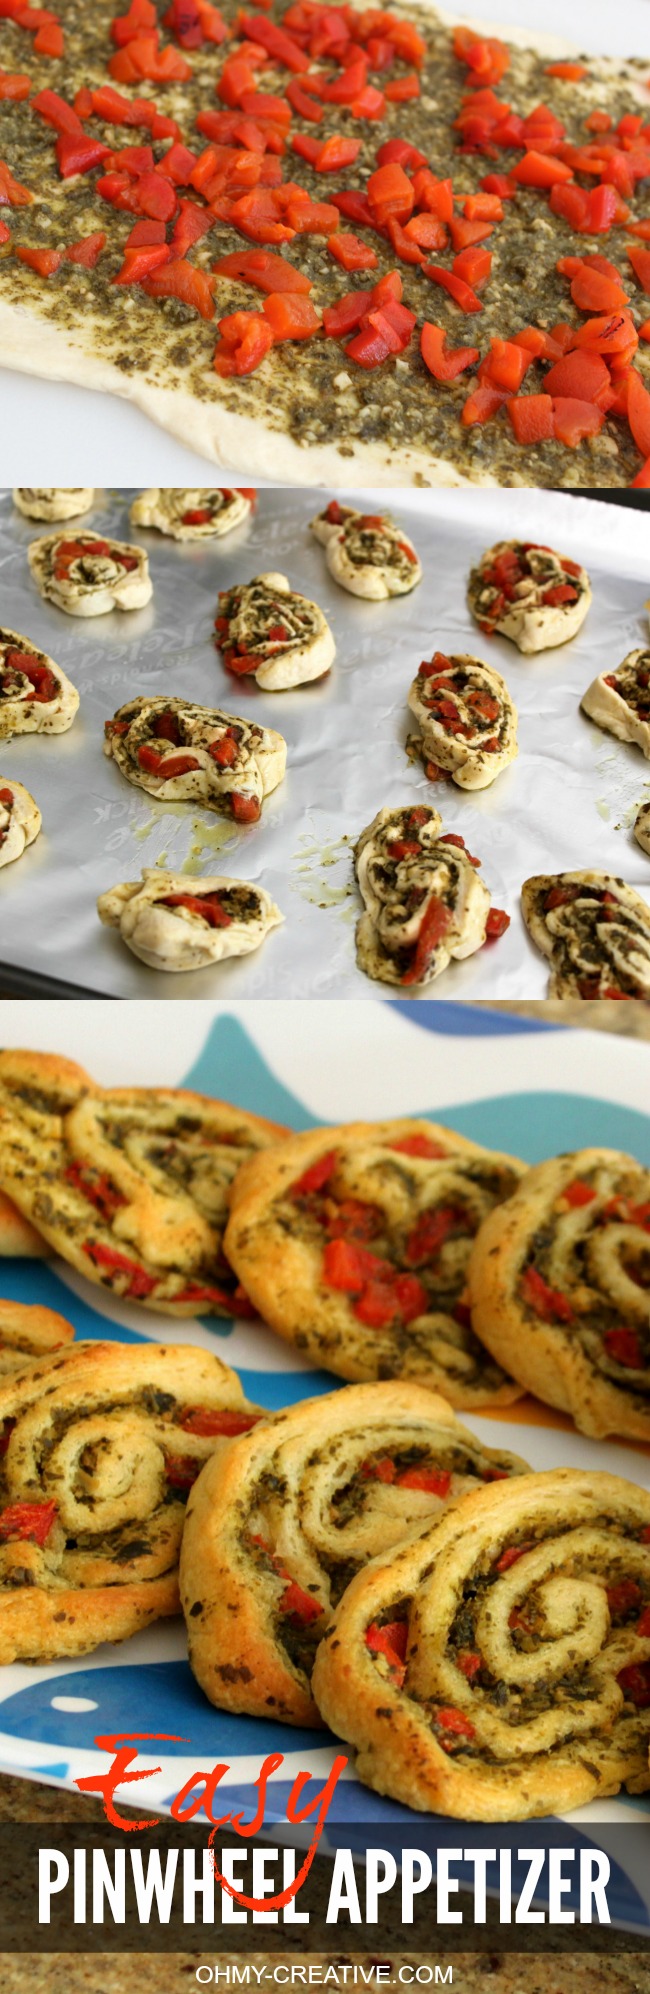 With just a few ingredients this Party Pesto Pinwheel recipe is easy to put together in a pinch - friends will love it!  |  OHMY-CREATIVE.COM